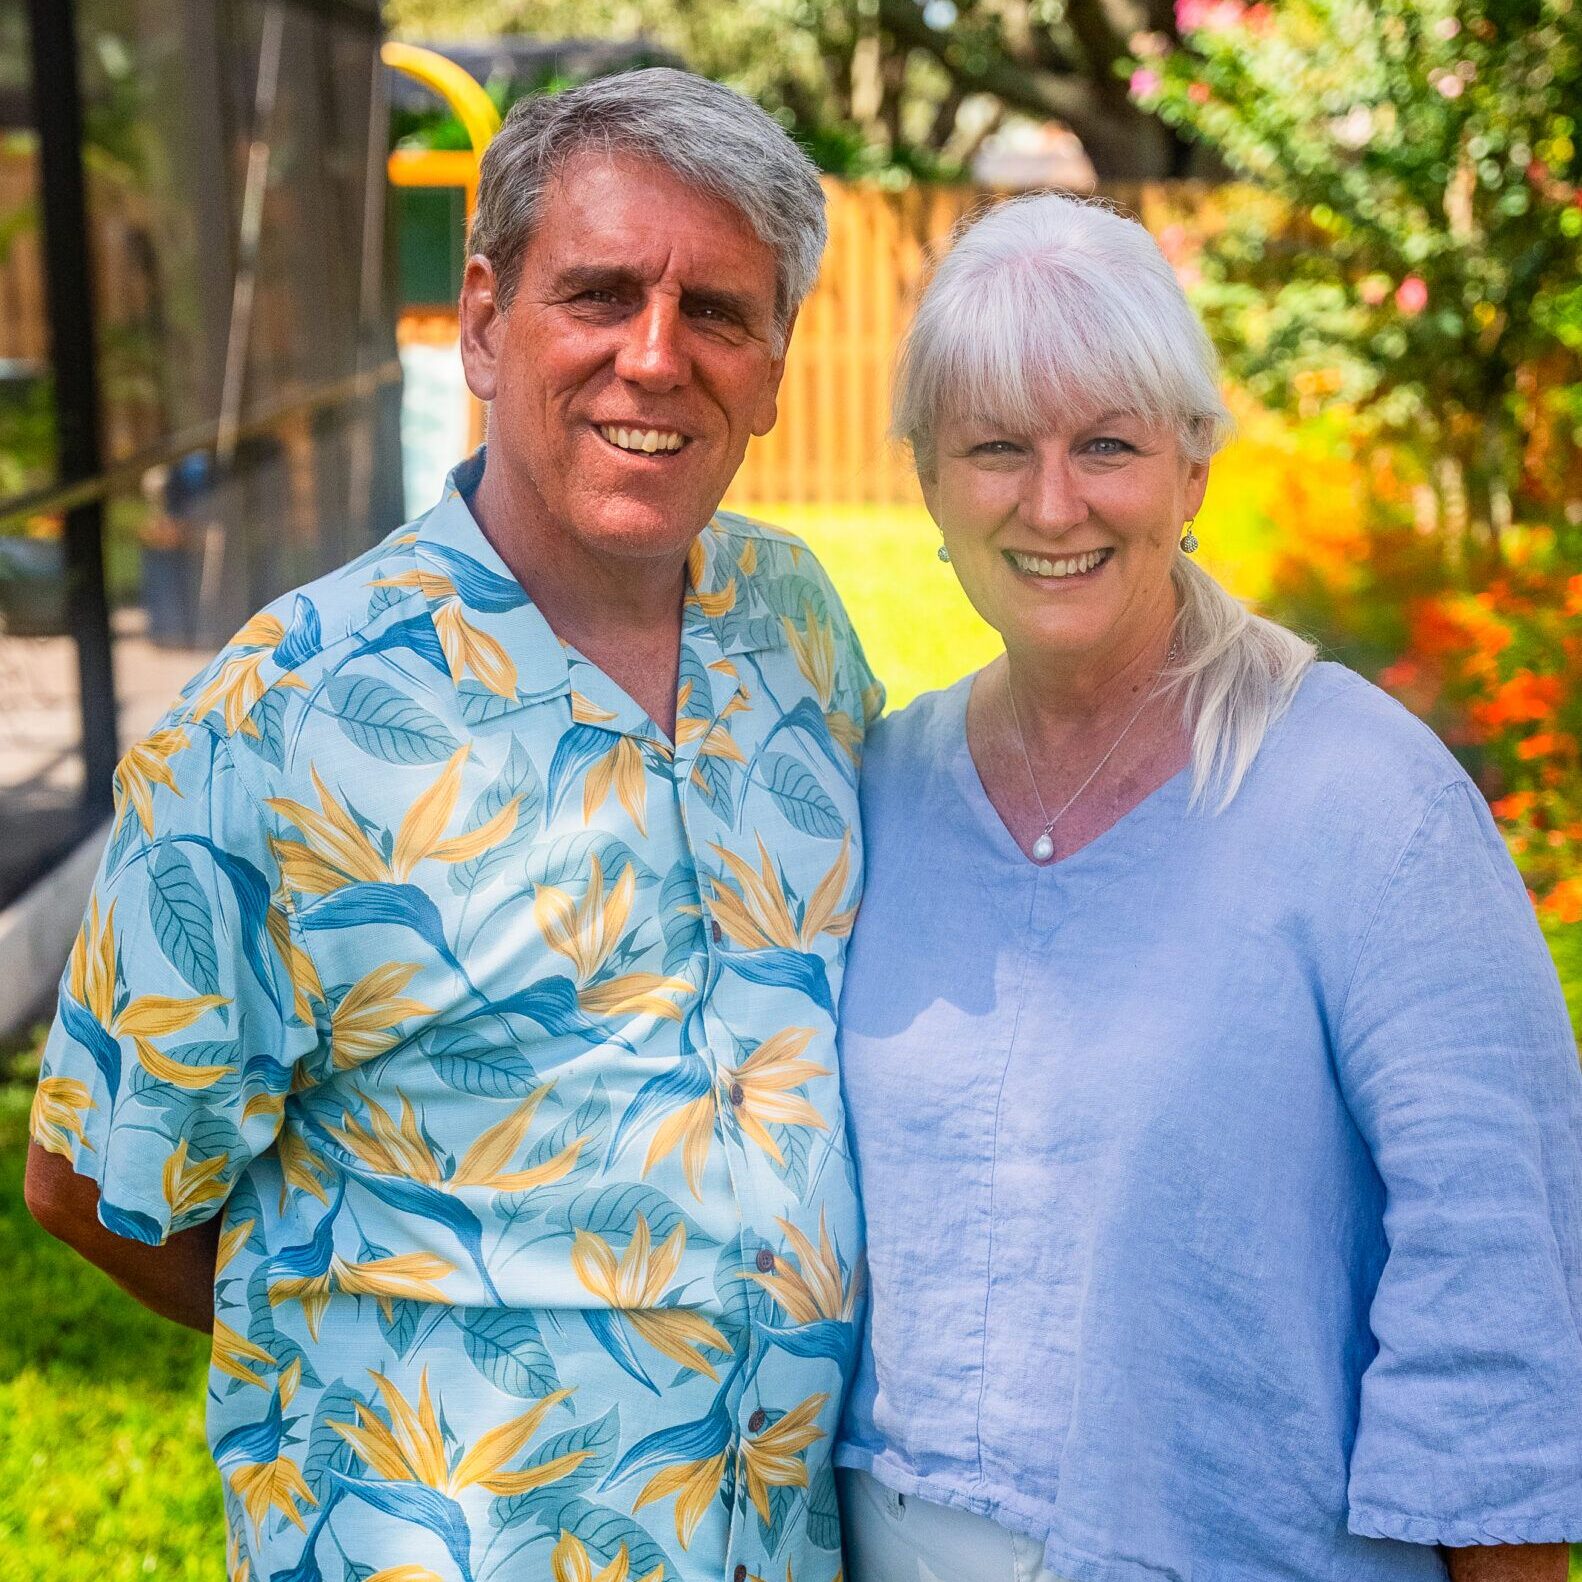 GBM Survivor and his wife, Tammy